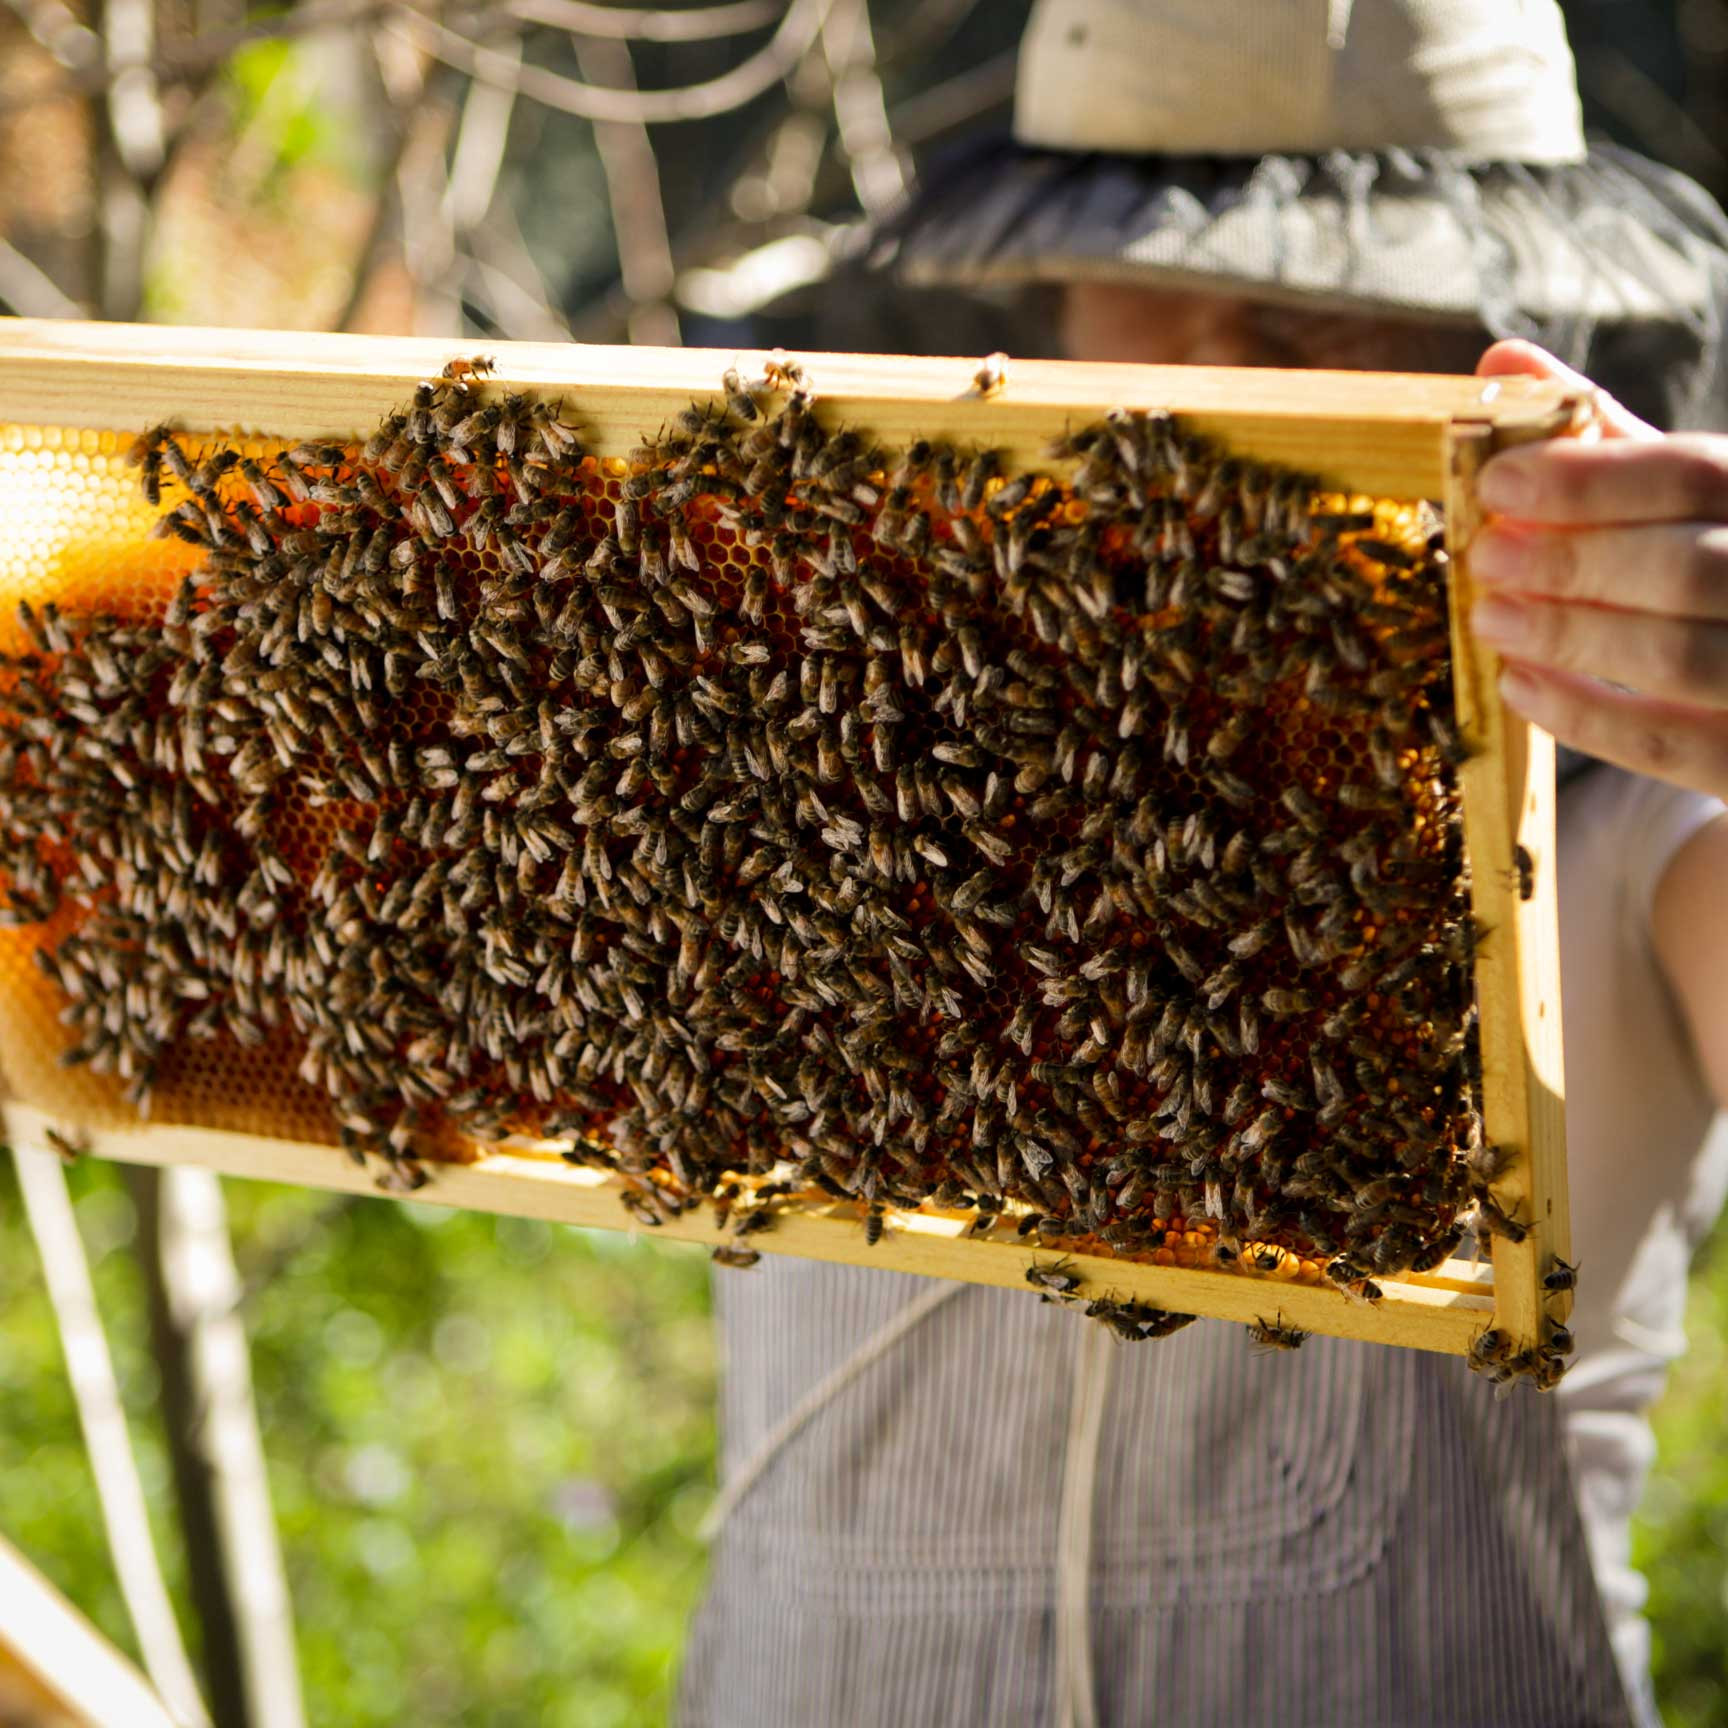 Beekeeping Basics - A 3-Part course for beginners. April 21, 23, and 25